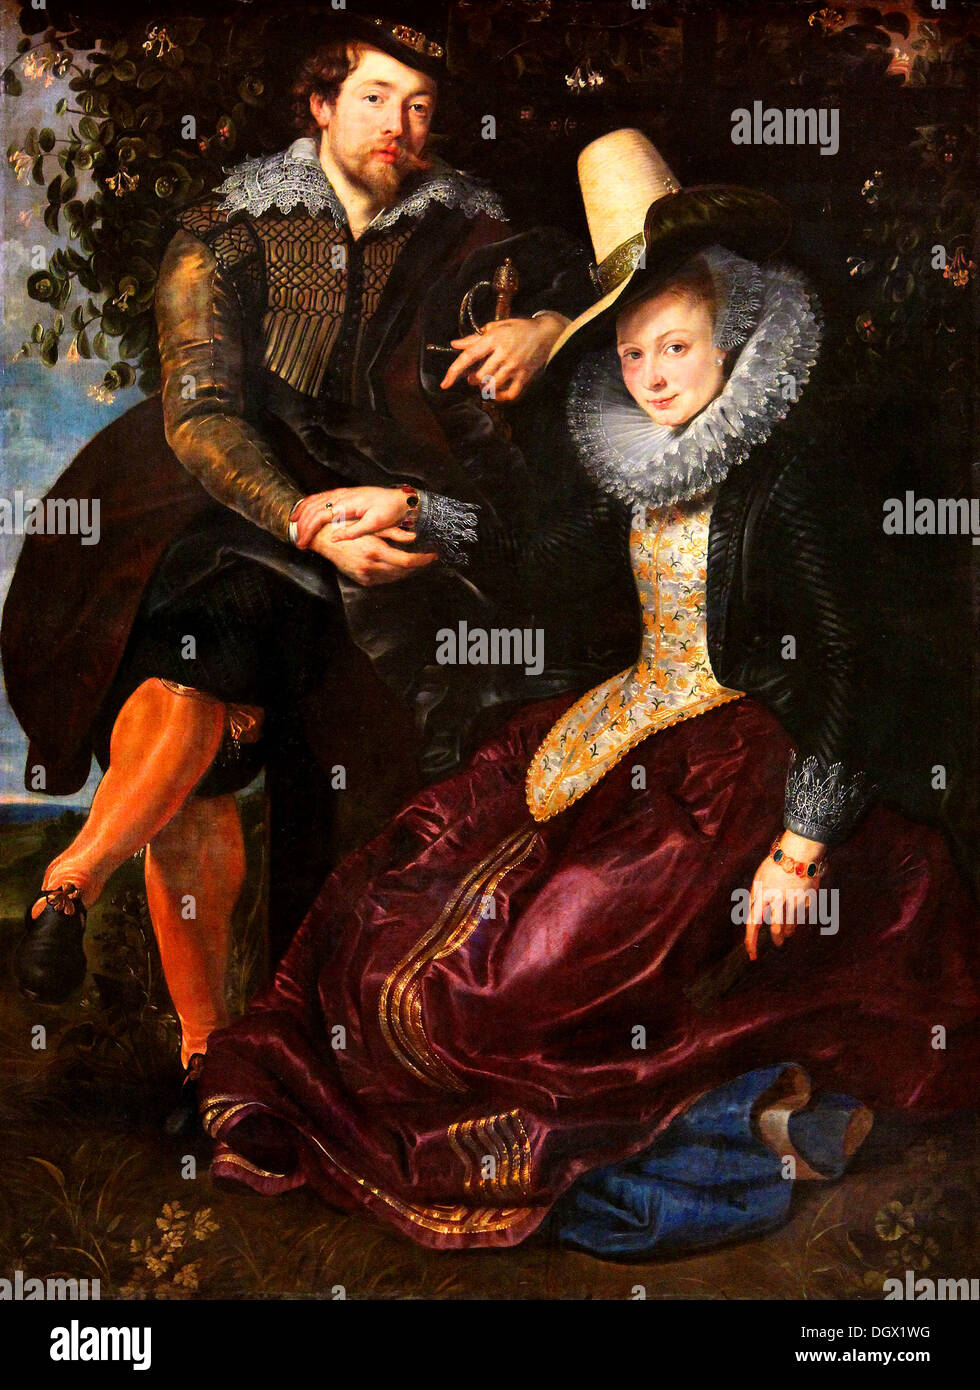 The Artist and His First Wife, Isabella Brant, in the Honeysuckle Bower - by Peter Paul Rubens, 1625 Stock Photo